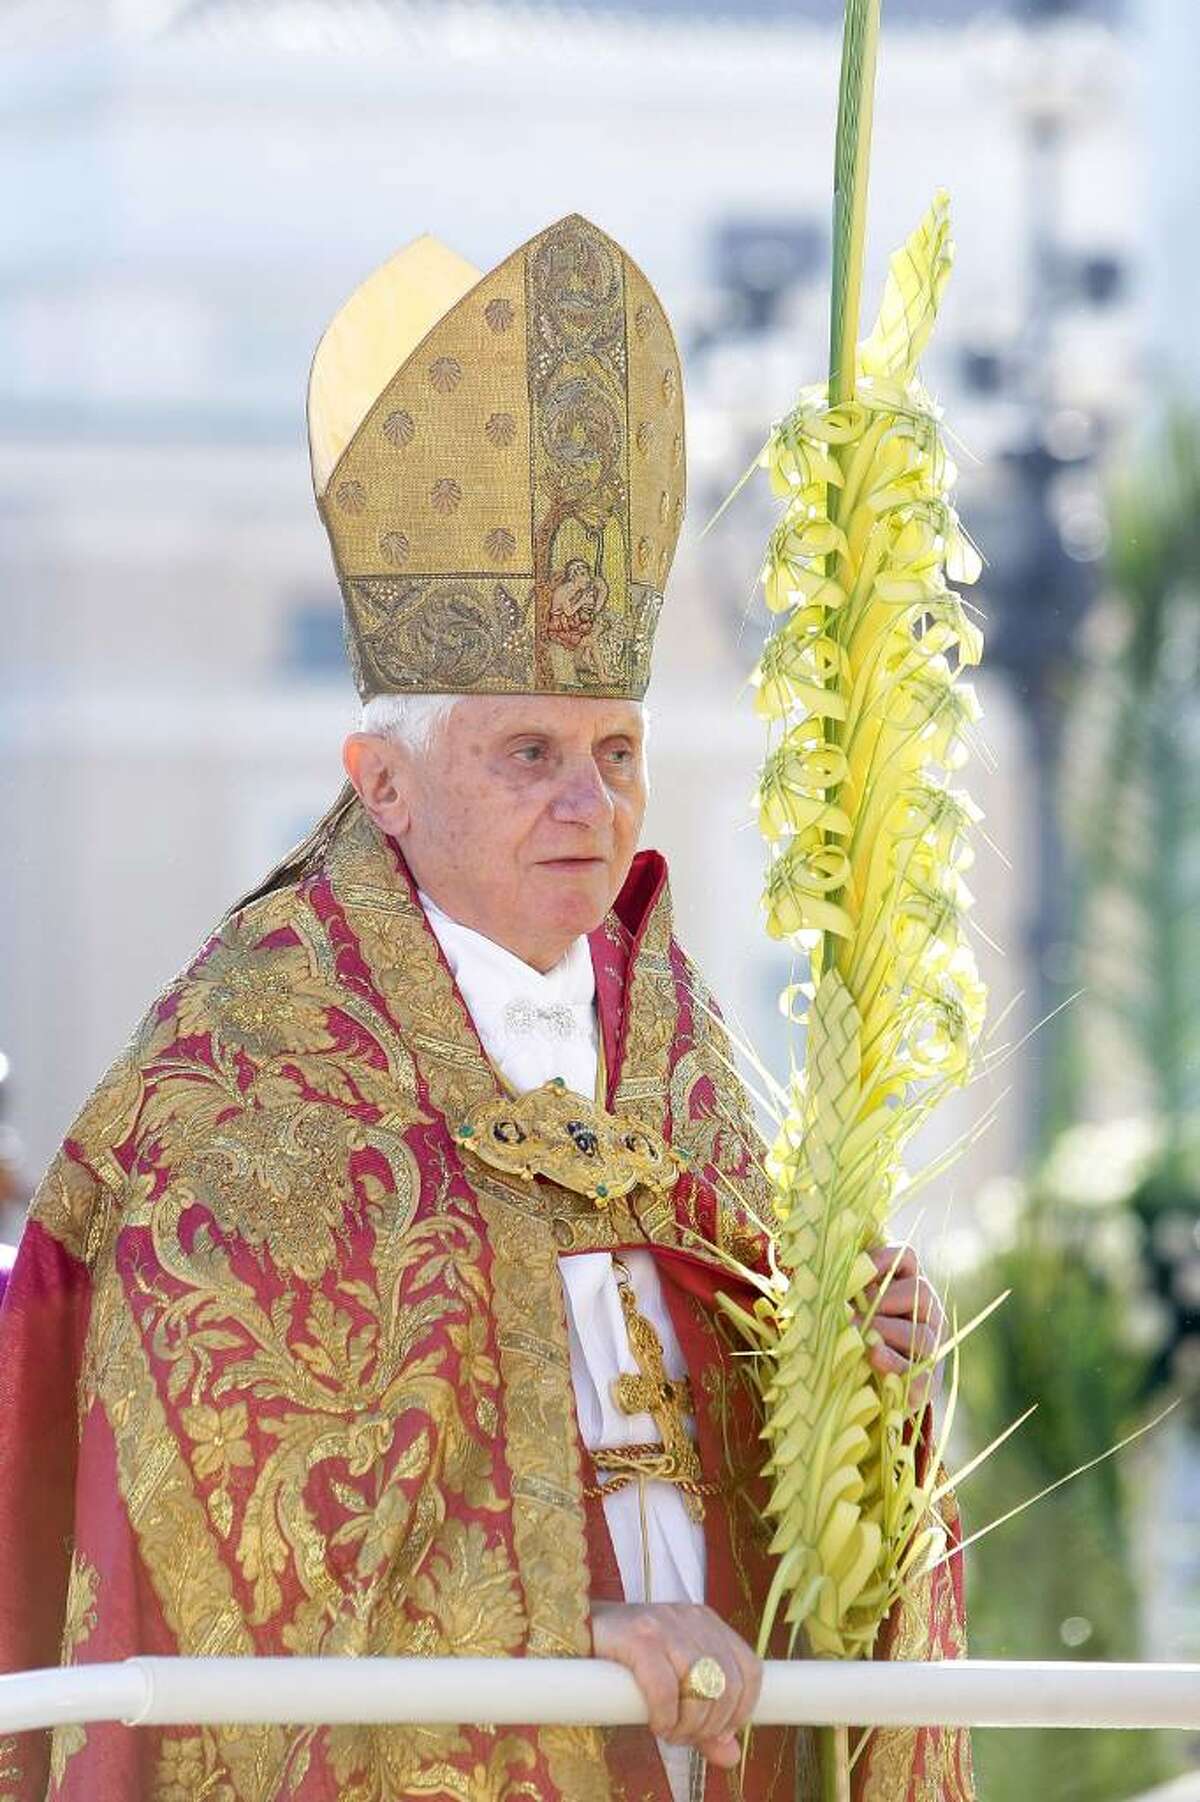 Pope Benedict XVI attends Palm Sunday Mass on March 28, 2010 in Vatican City, Vatican. The Pope is now facing pressure over abuse allegations which involved the German, the American and the Irish Catholic Church. (Photo by Franco Origlia/Getty Images